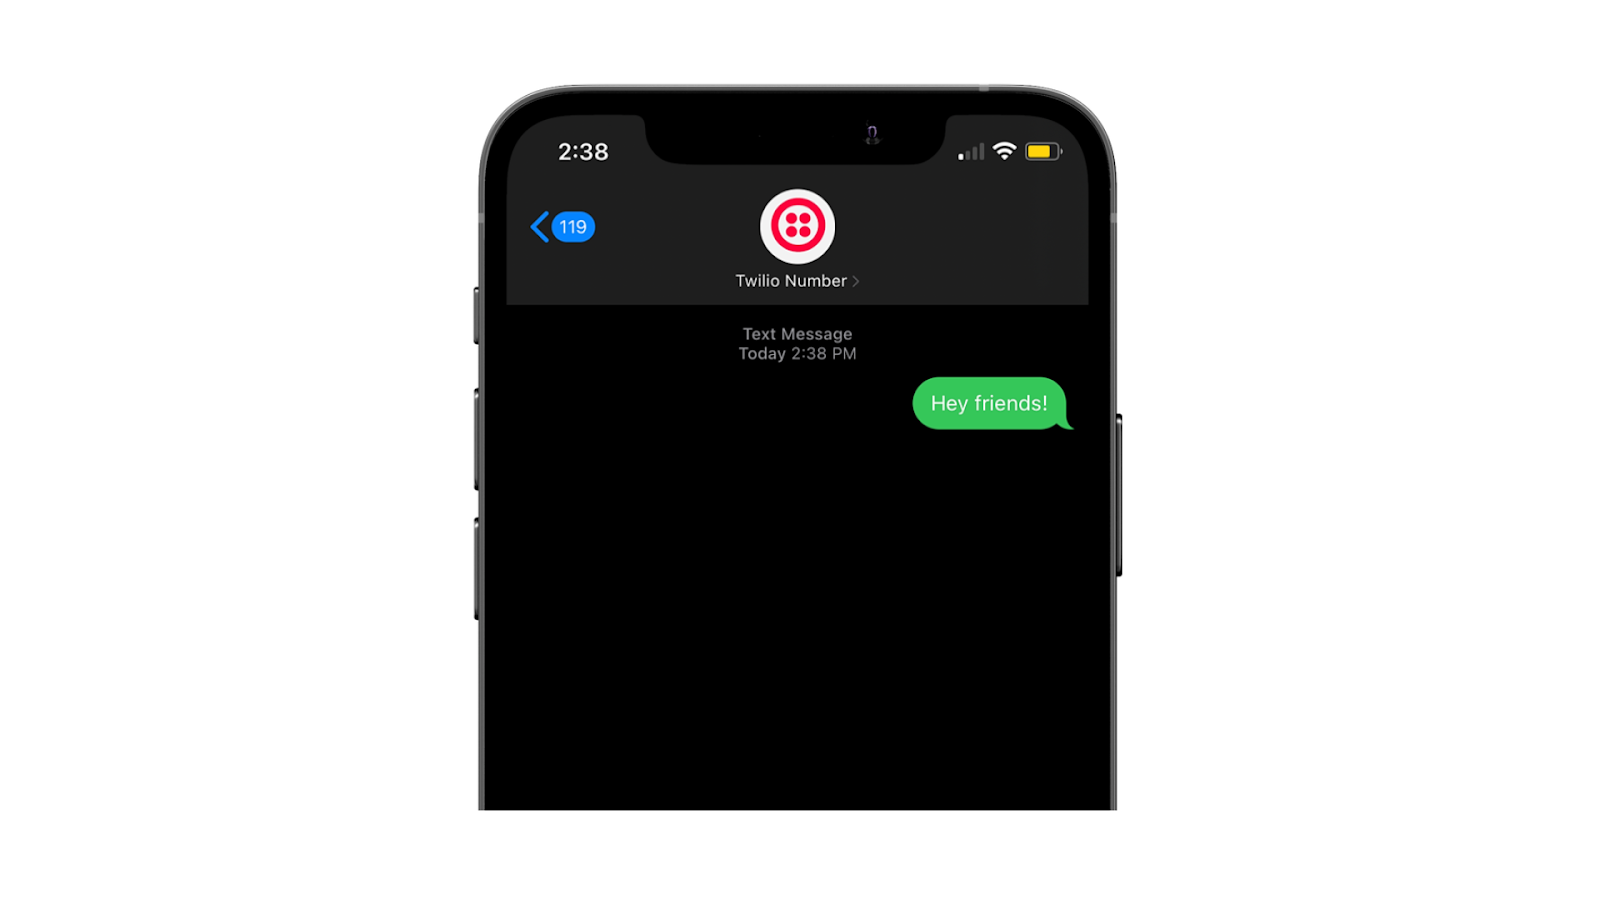 Phone screenshot of an sms messaging saying, "Hey friends!" being sent to Twilio number